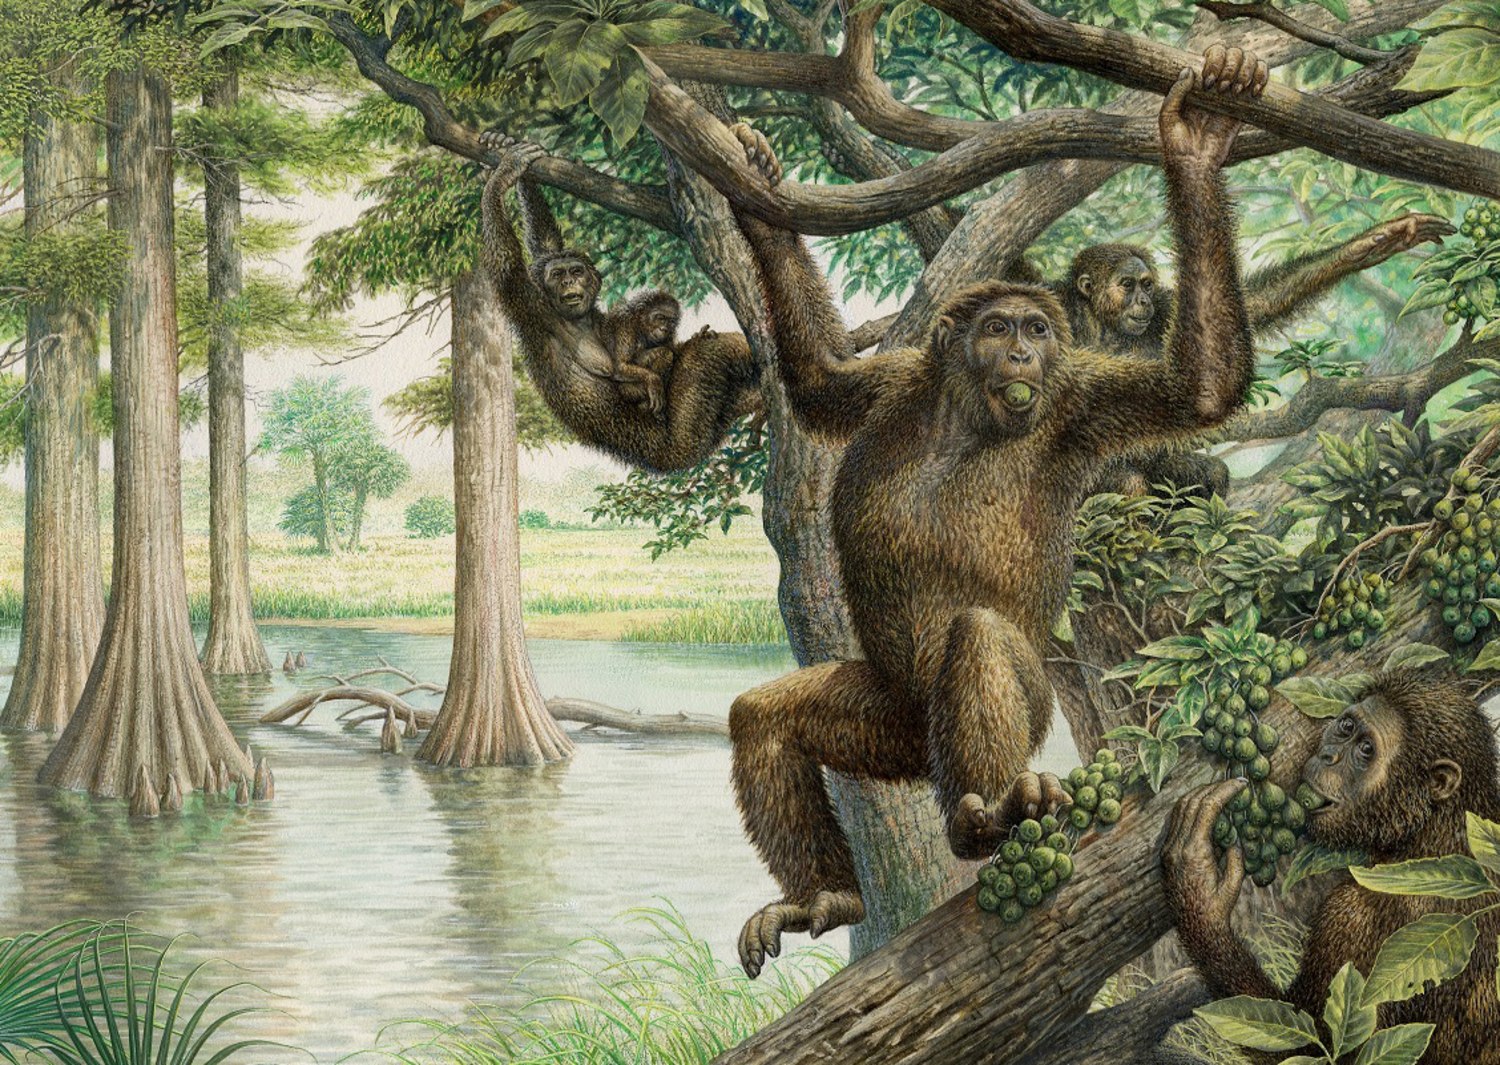 Ancient ape fossil yields surprising new insights about human evolution